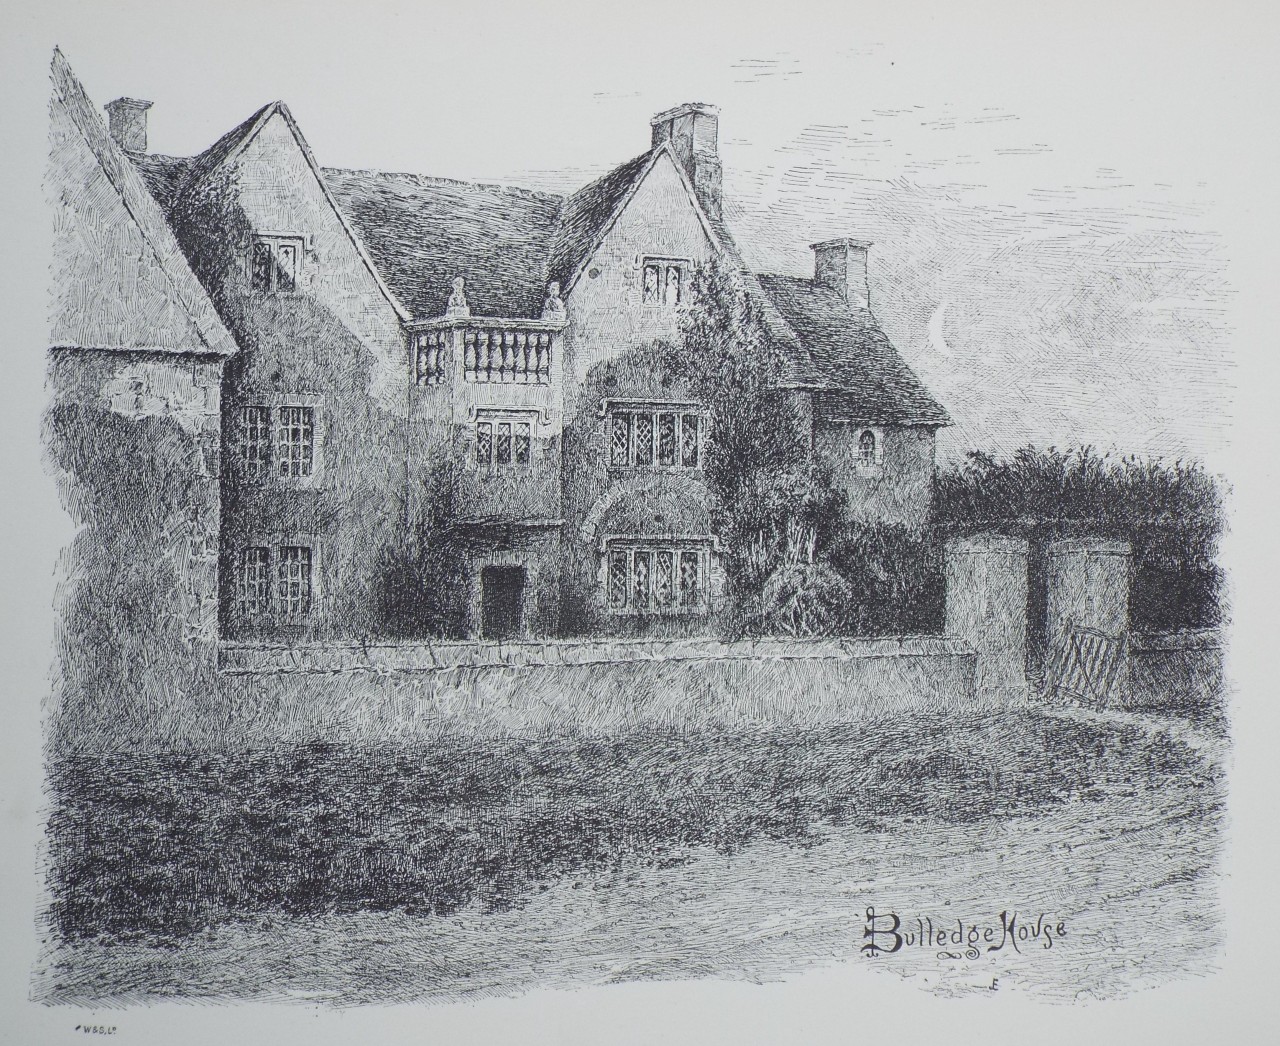 Lithograph - Bulledge House